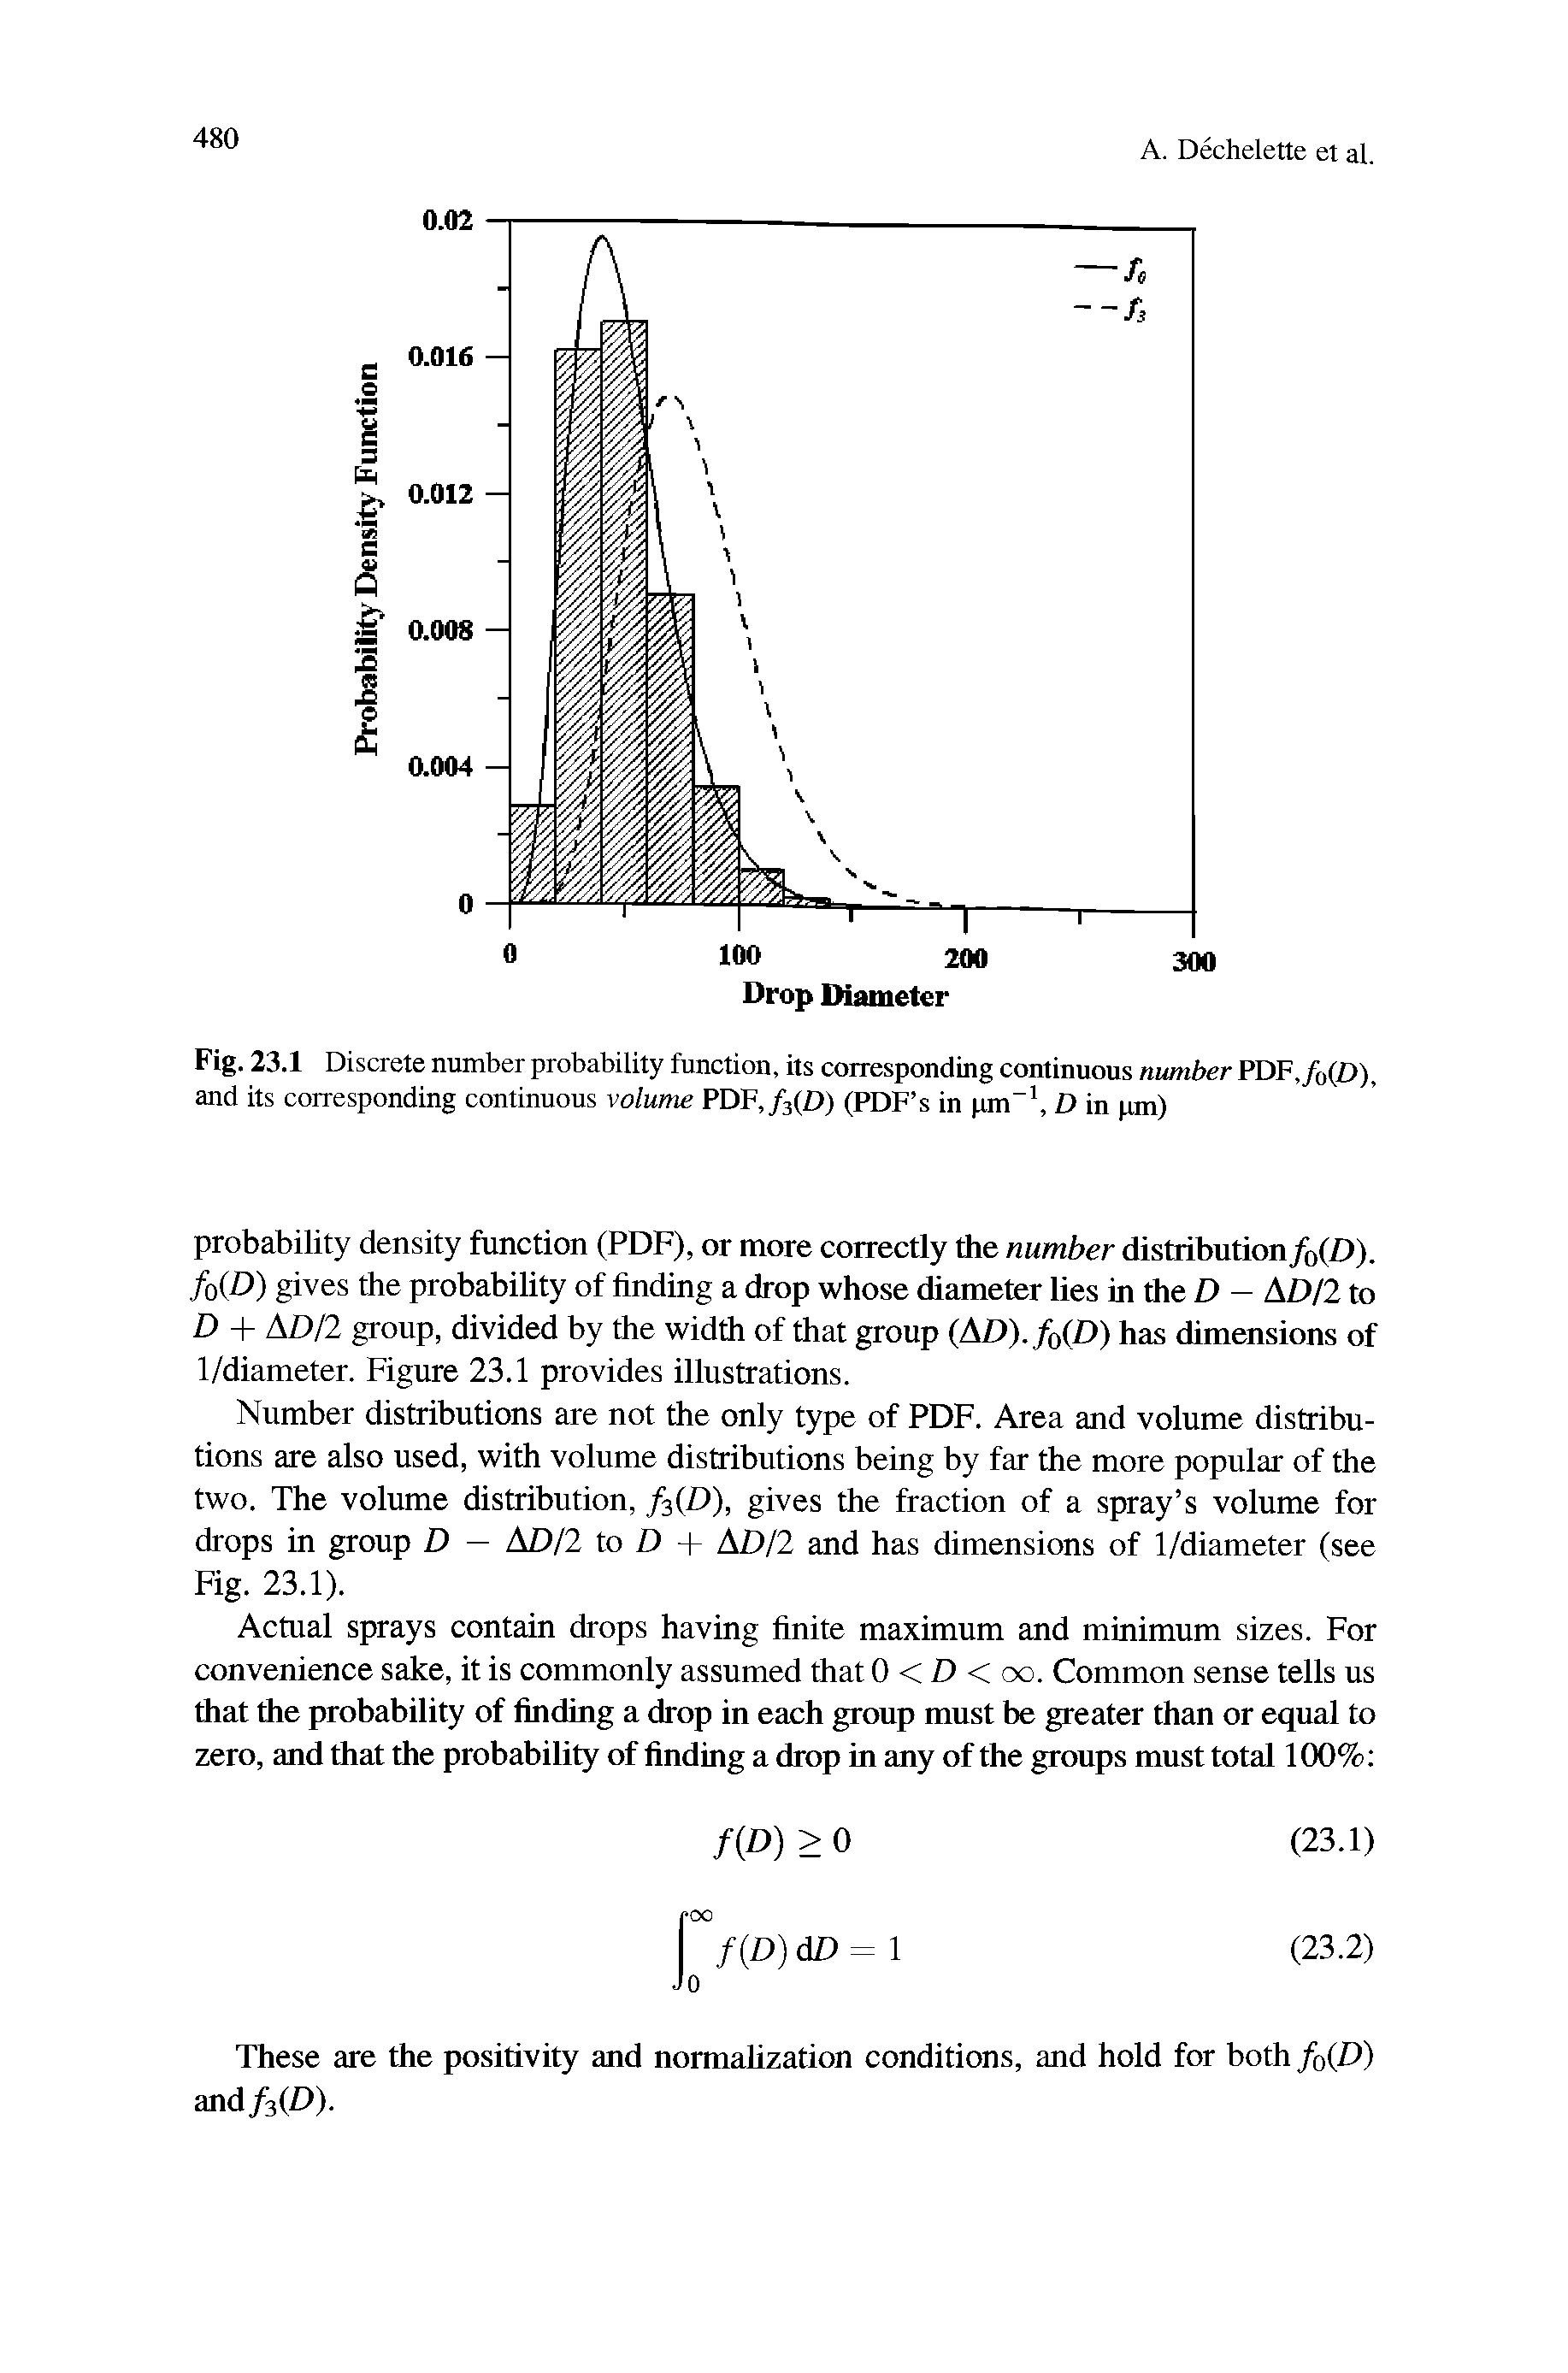 Fig. 23.1 Discrete number probability function, its corresponding continuous number PDF,/o(0) and its corresponding continuous volume PDF,/3(D) (PDF s in pm , D in pm)...